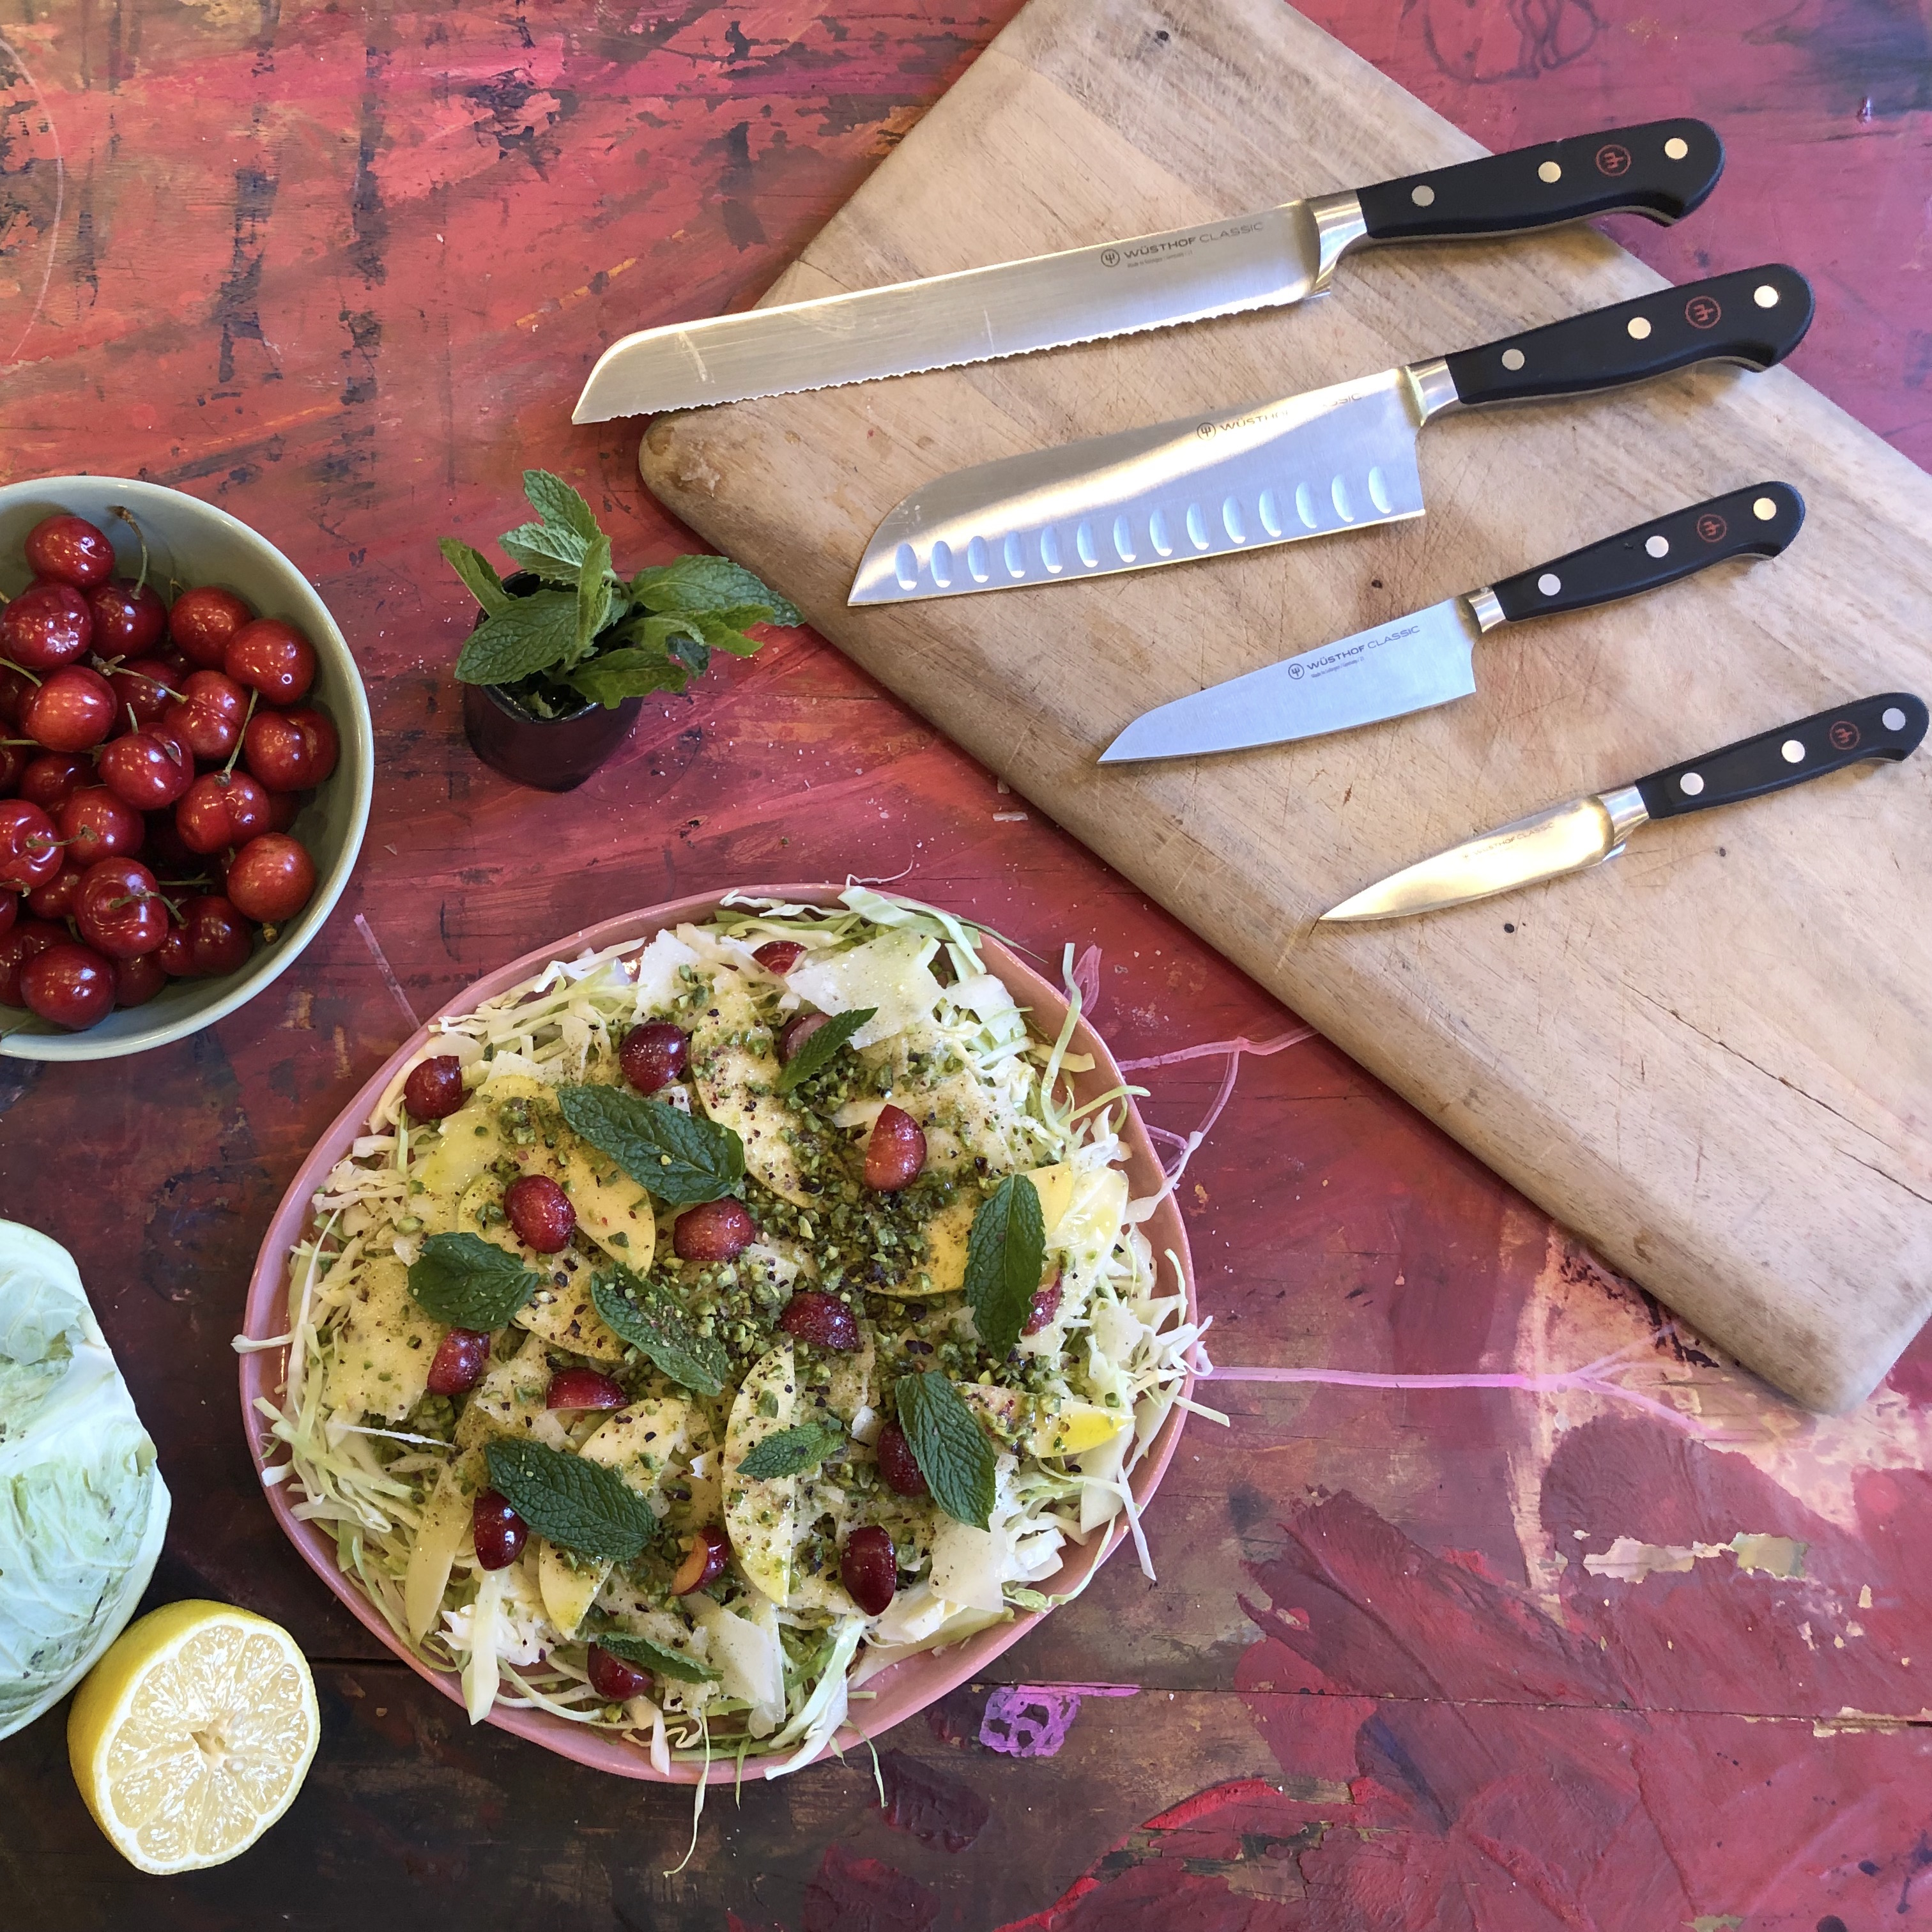 Cabbage salad plated with four WÜSTHOF knives arranged on a cutting board.